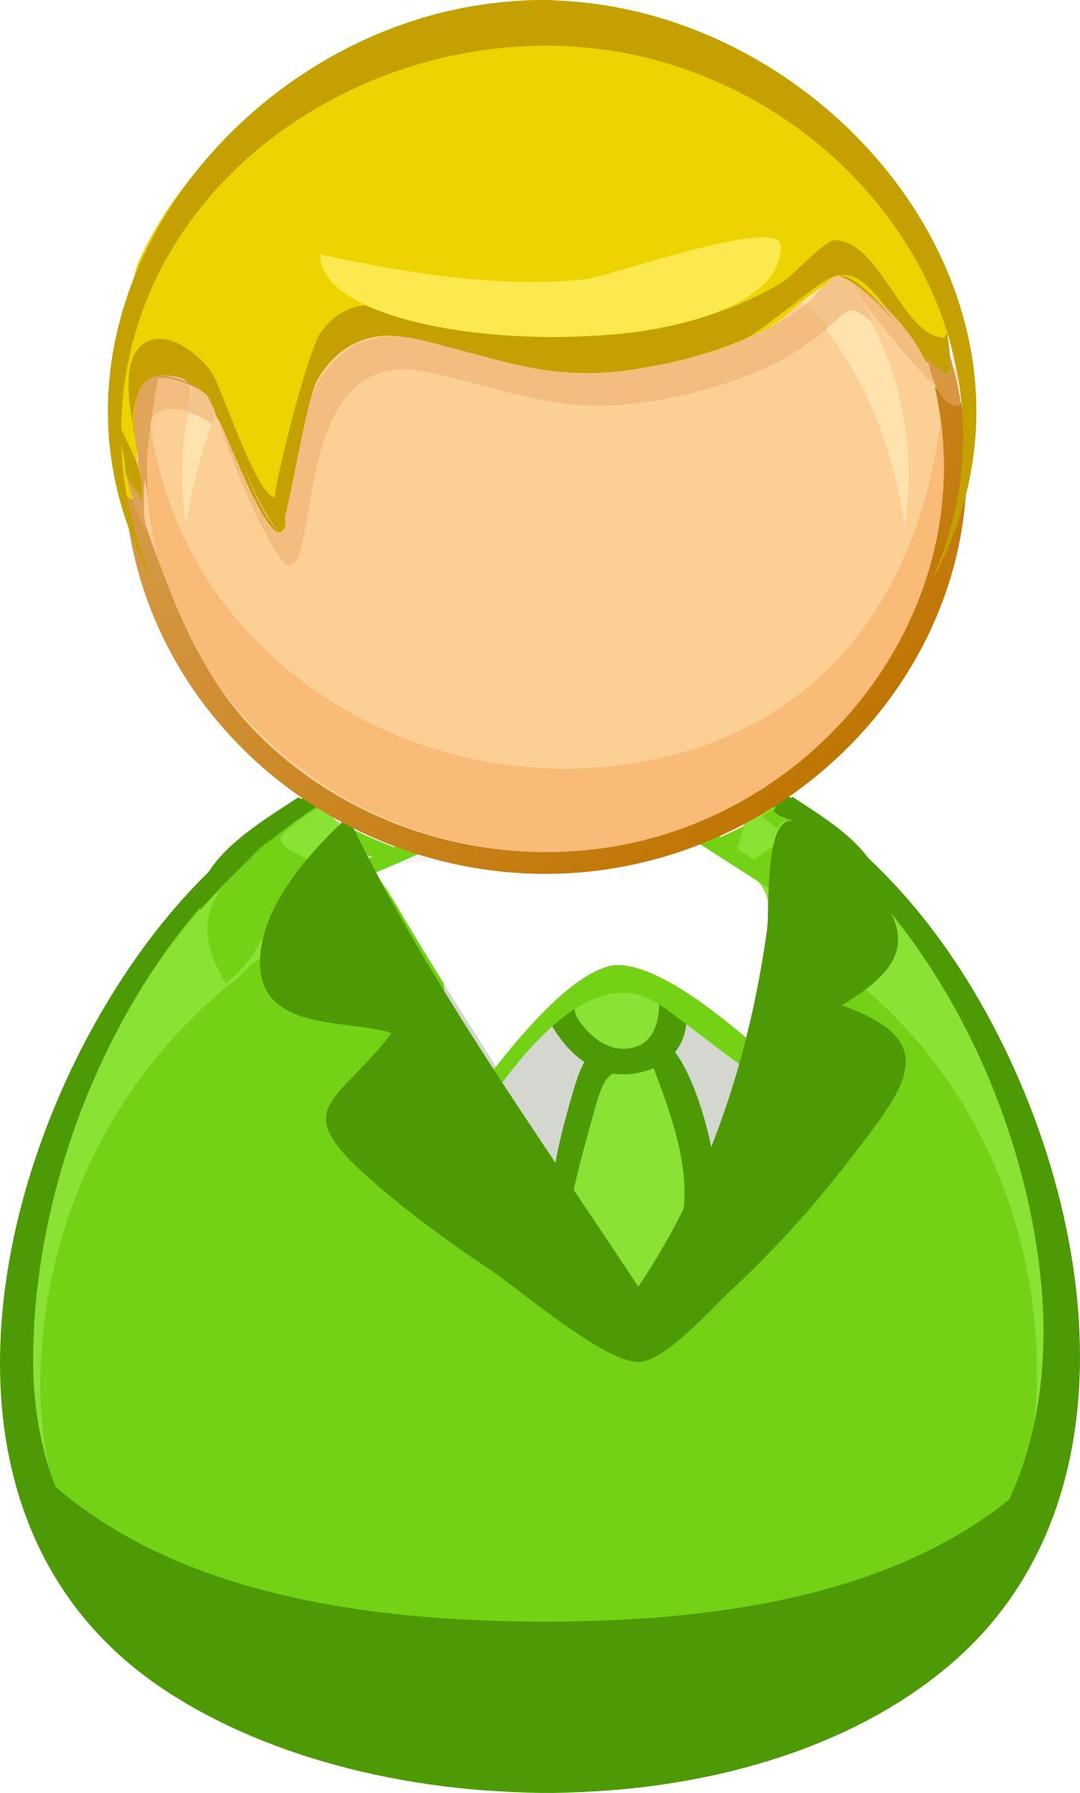 Architetto remix - Green blond man icon png transparent